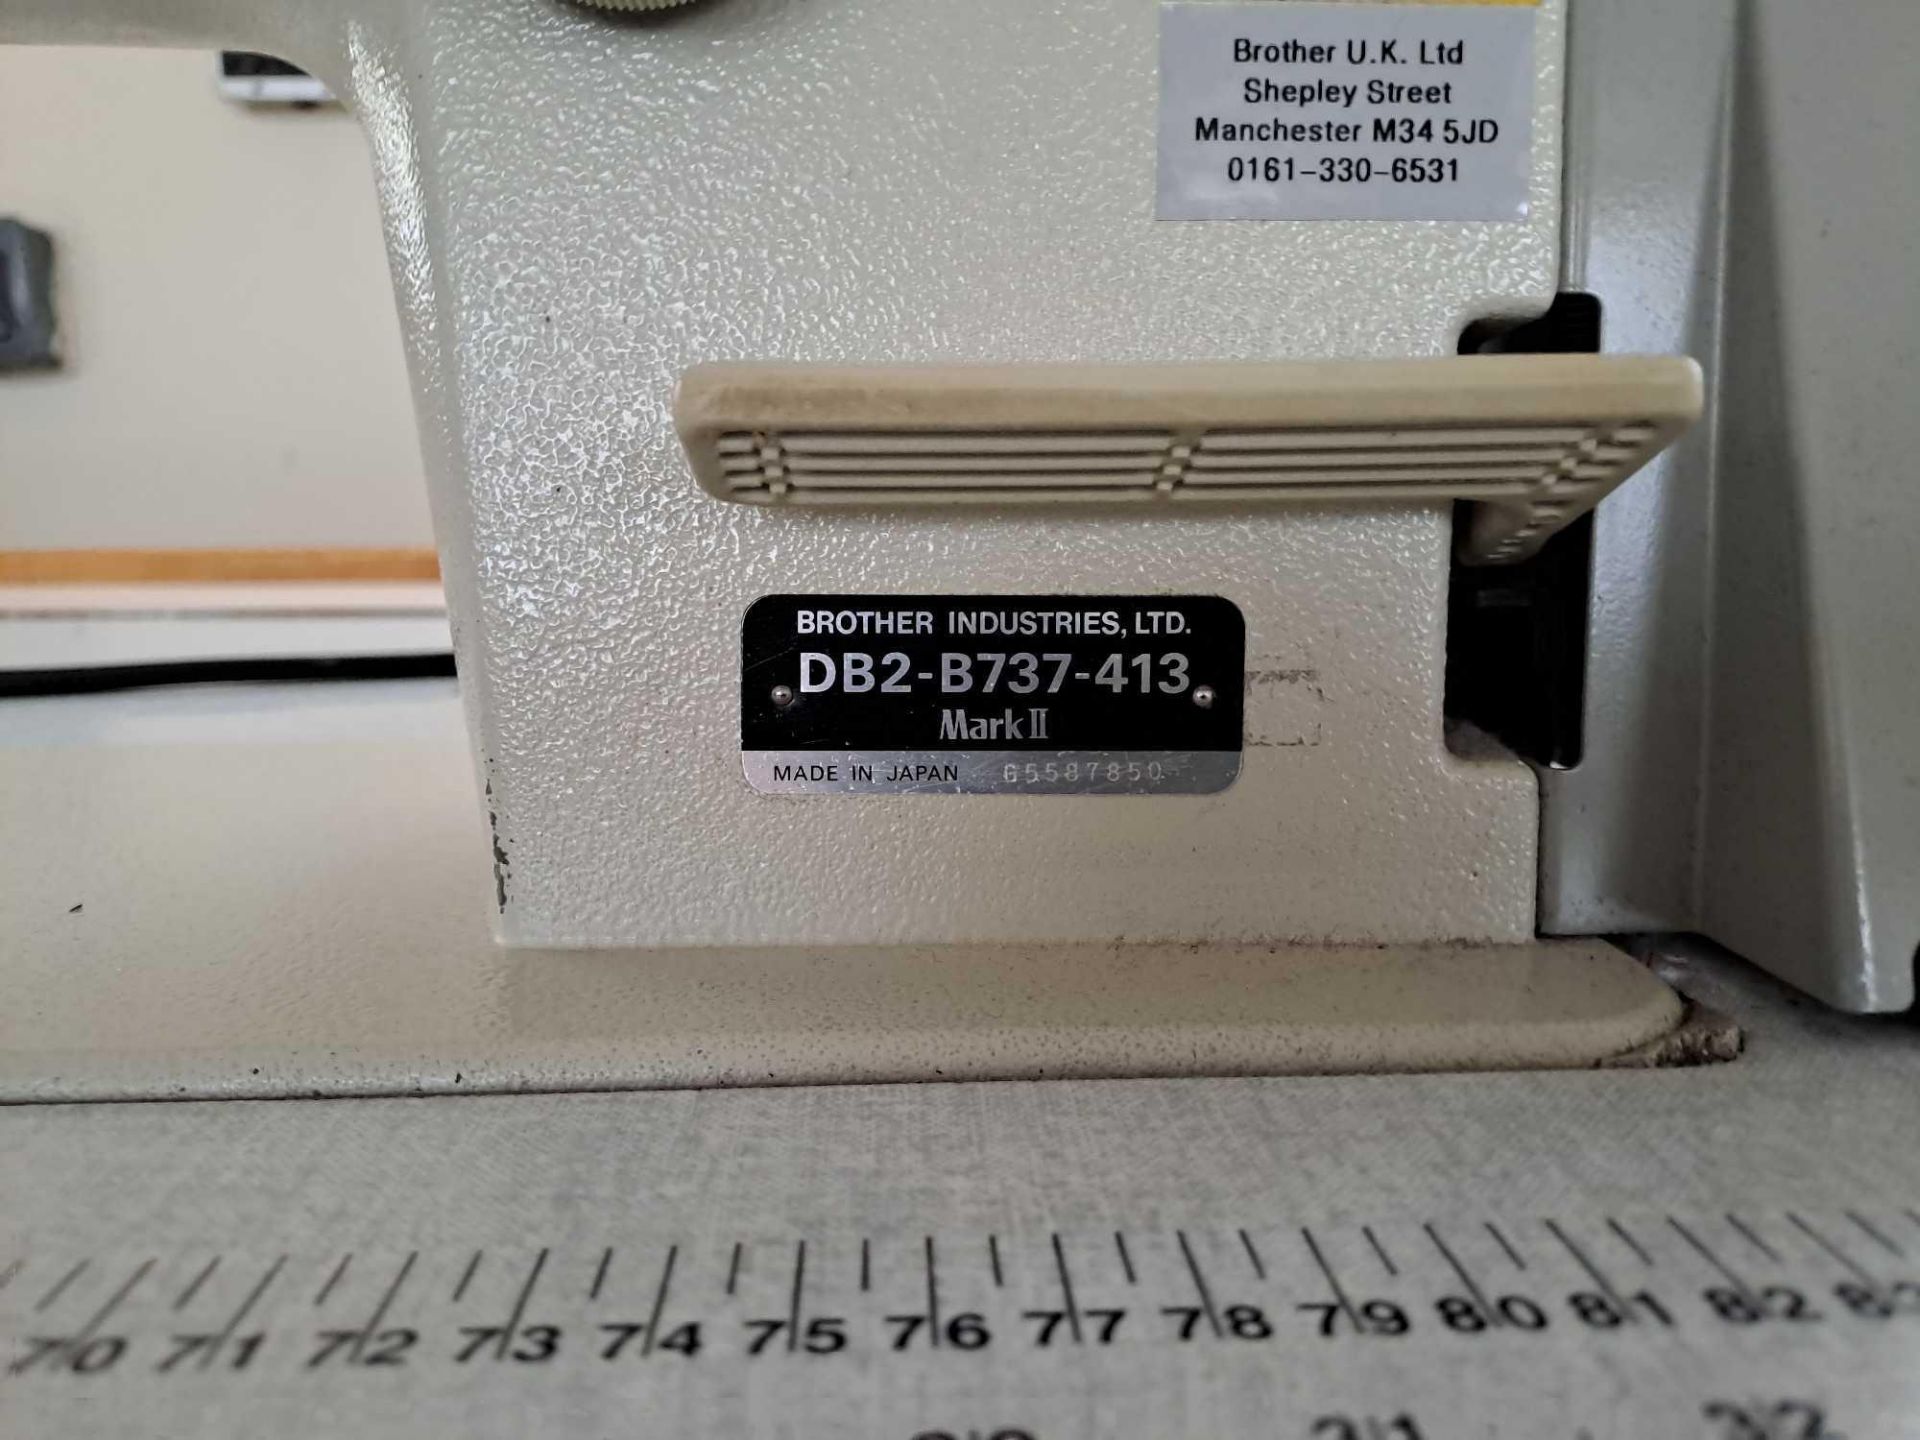 Brother DB2-B737-413 Sewing Machine - Image 4 of 6